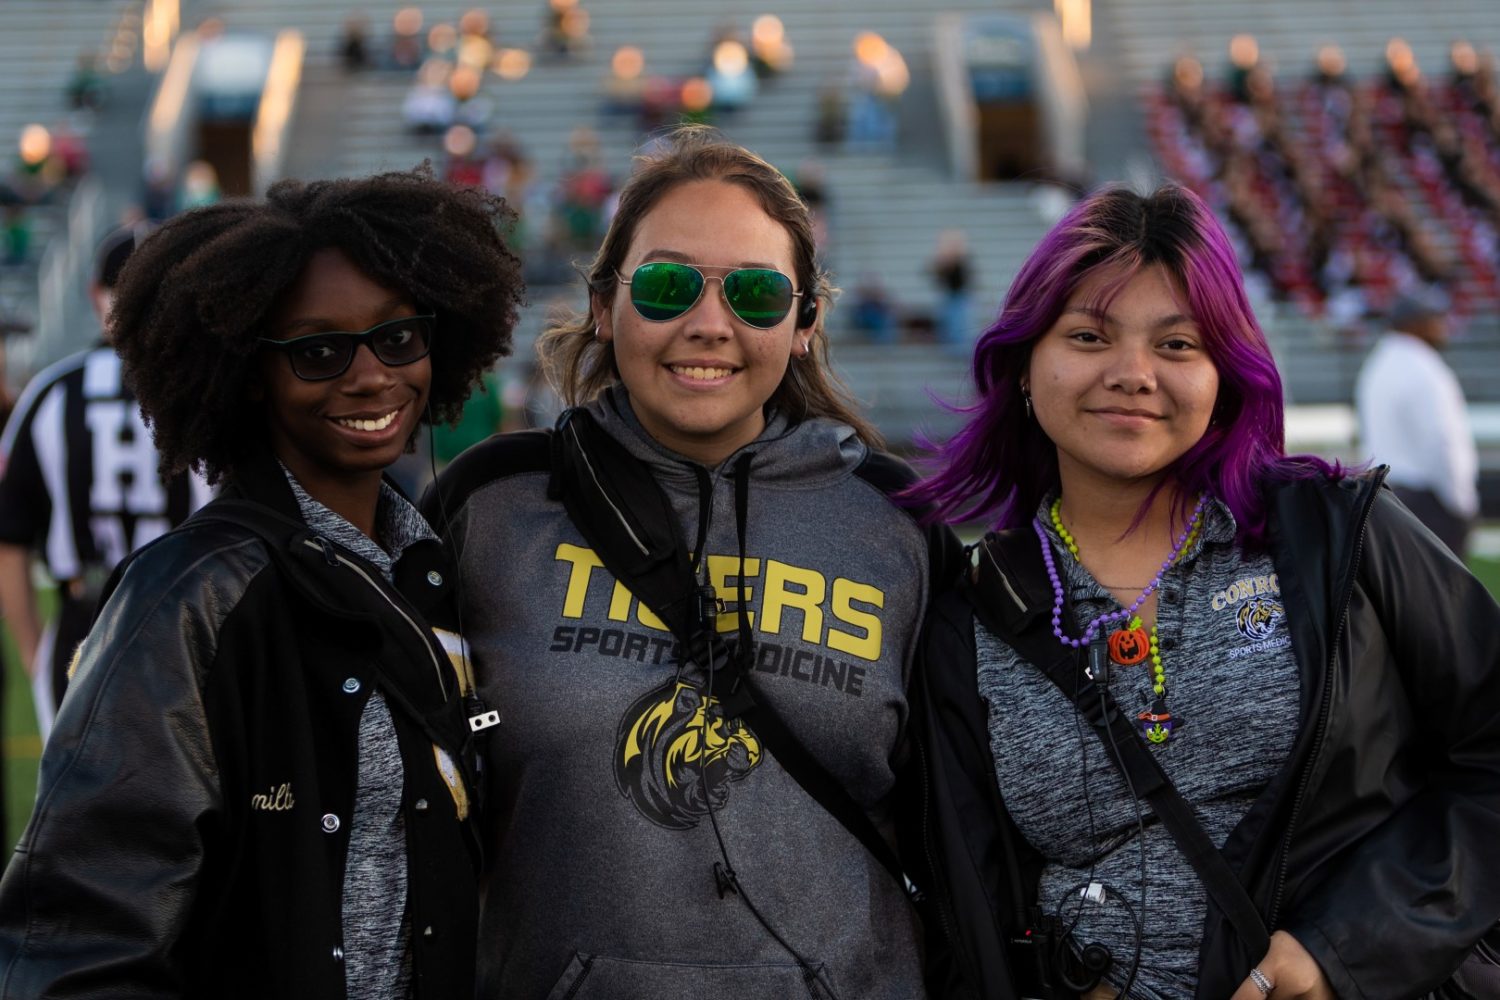 Three student trainers smile for the camera at a football game.